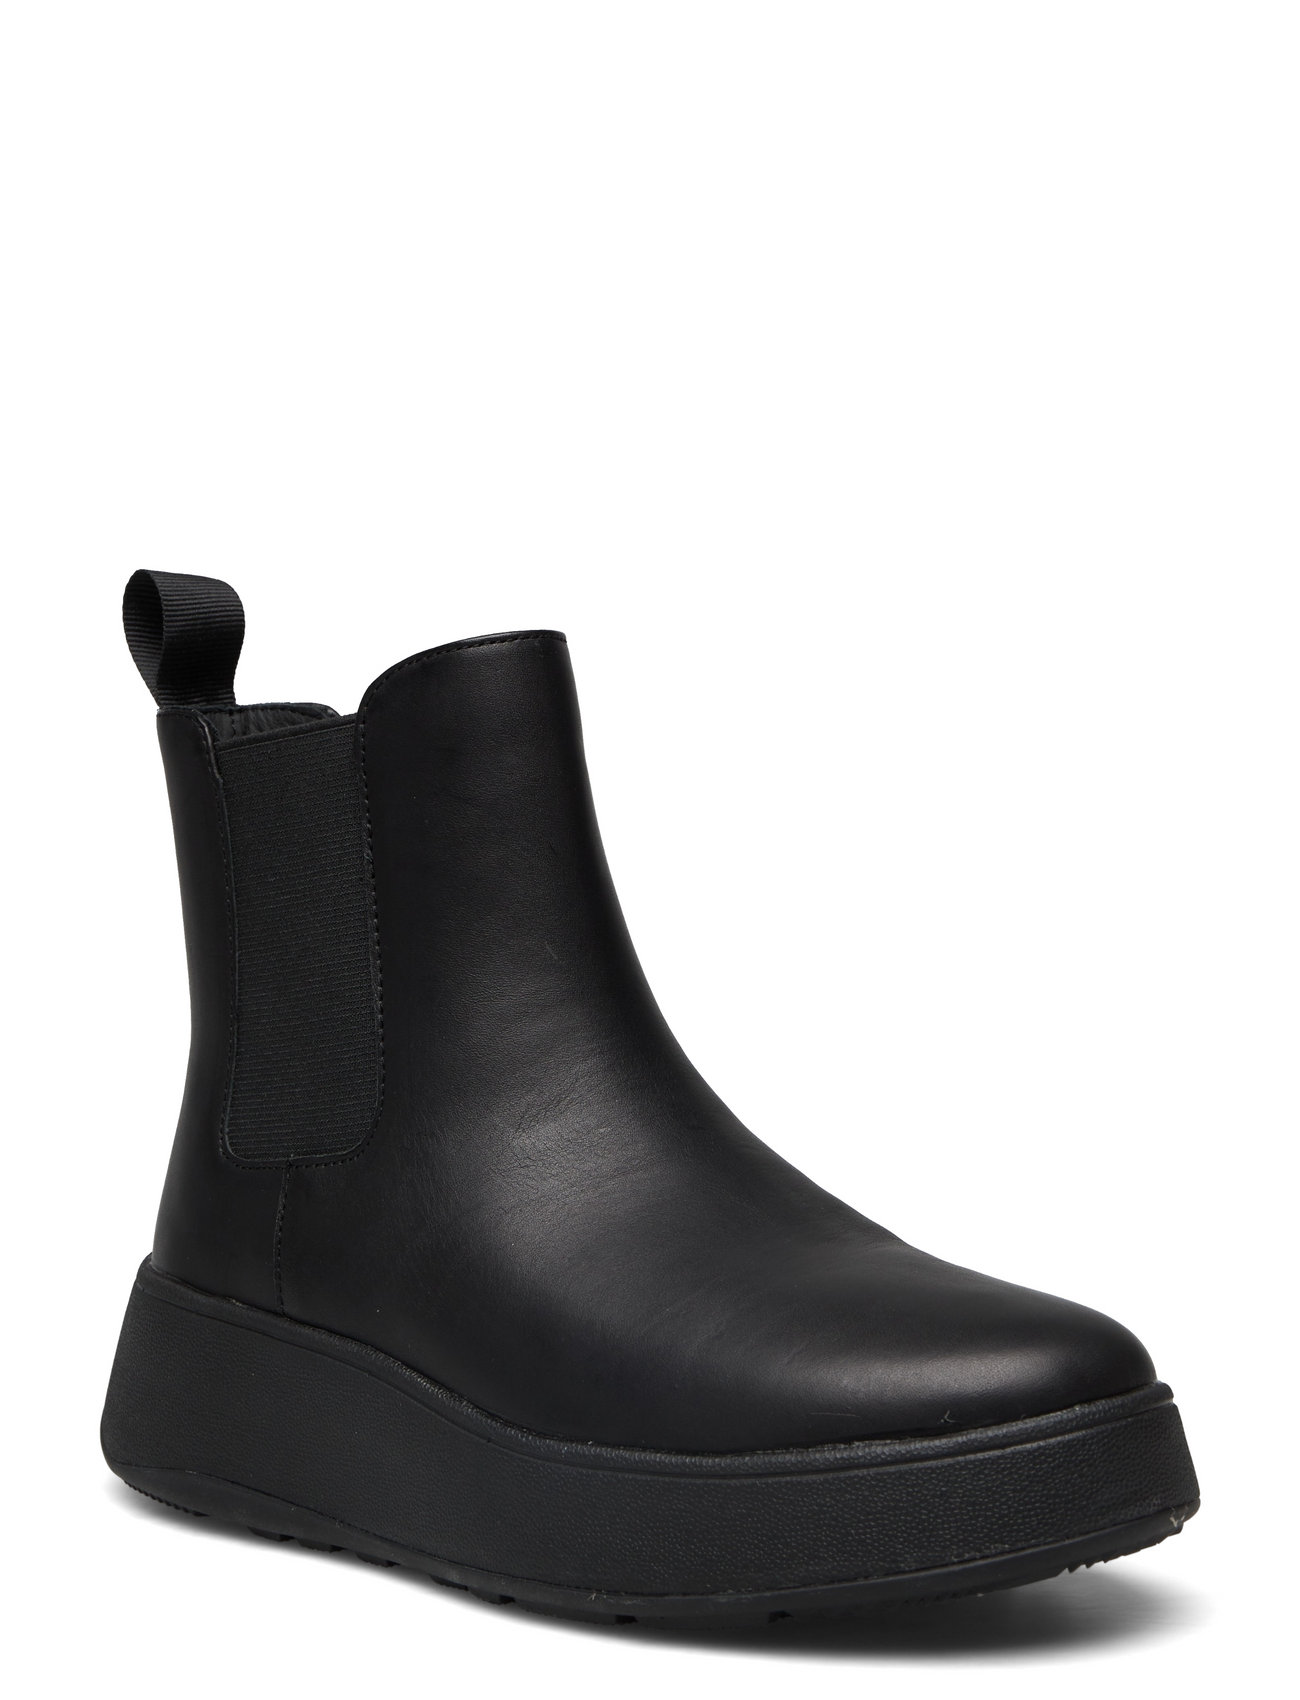 FitFlop F-mode Leather Flatform Chelsea Boots - Chelsea boots - Boozt.com